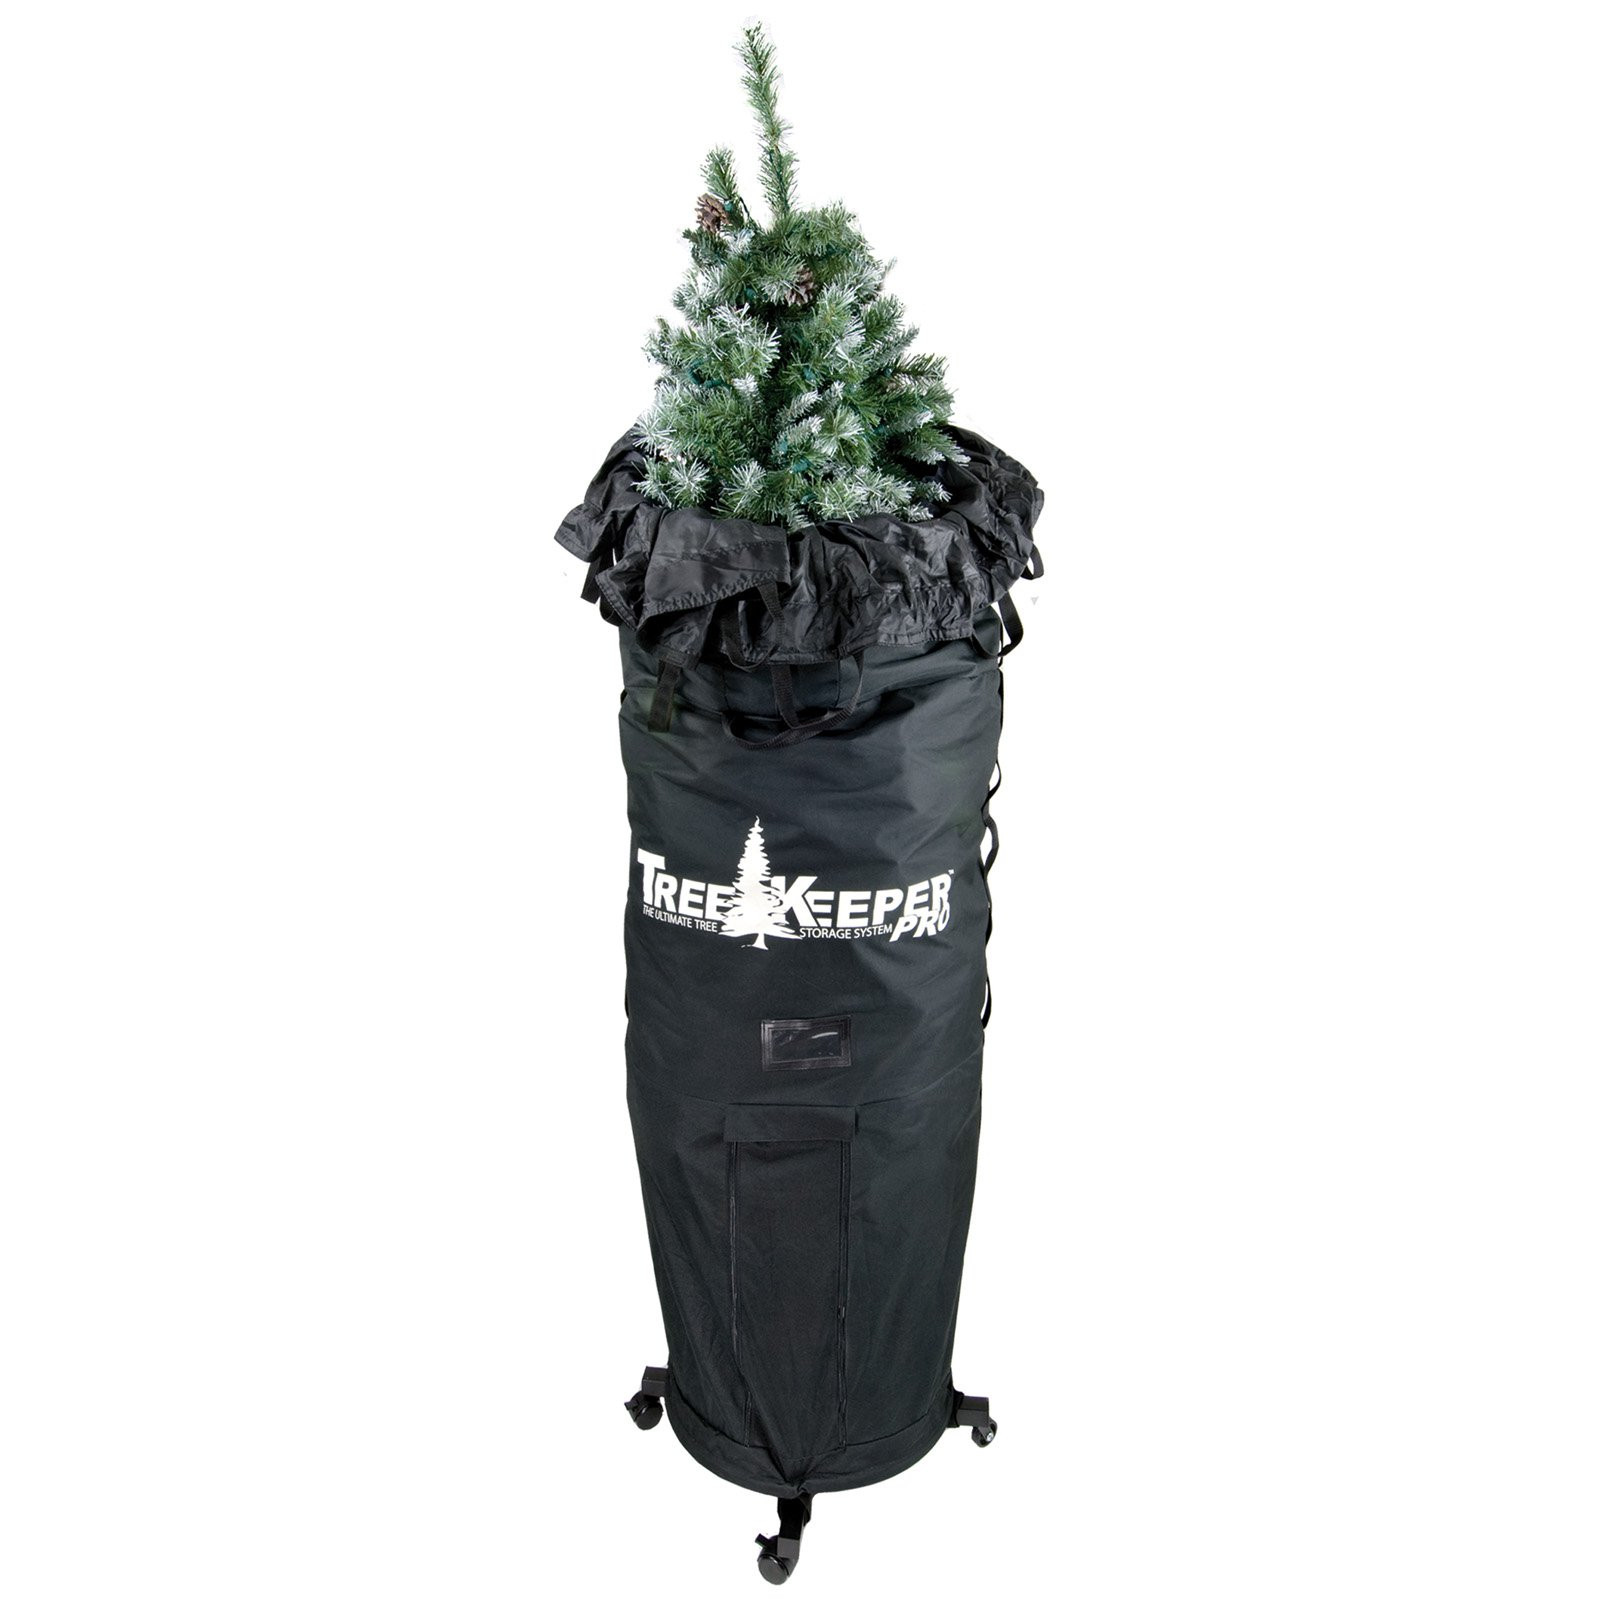 9 Ft Christmas Tree Storage
 Upright Artificial Christmas Tree Storage Bag with Wheels